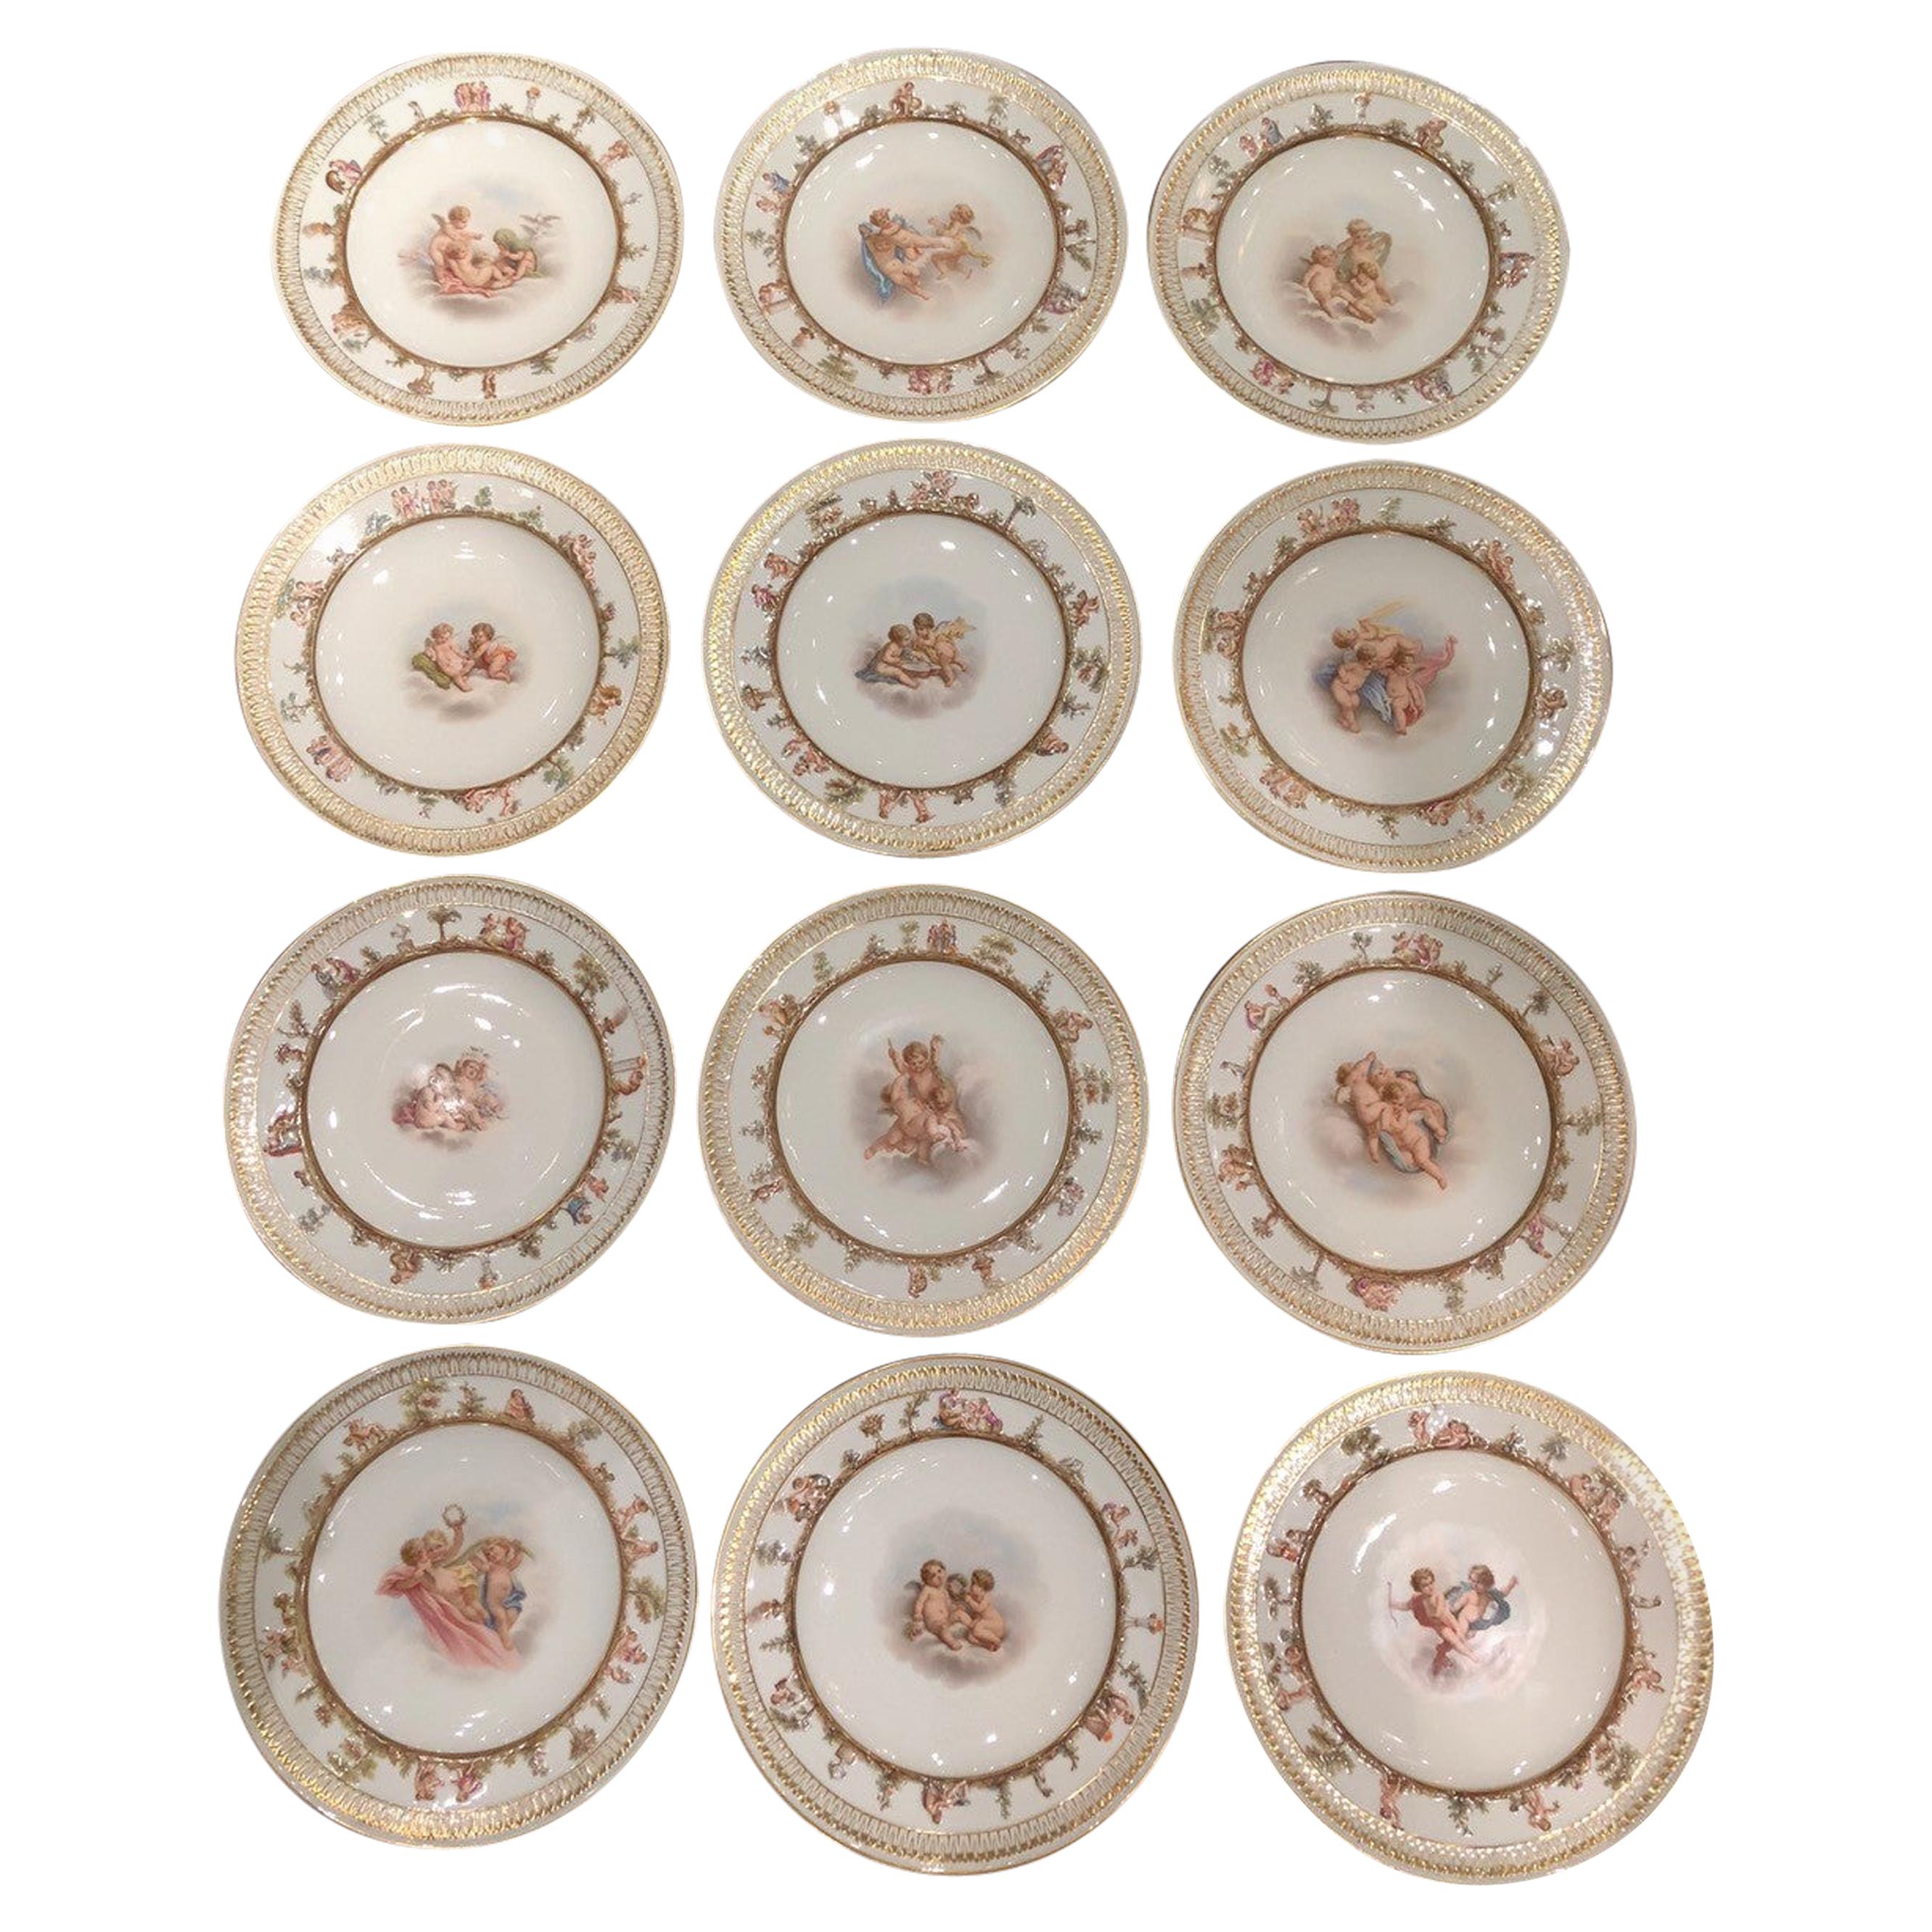 Set of Twelve Meissen Porcelain Plates with Putti and Heavenly Scenes